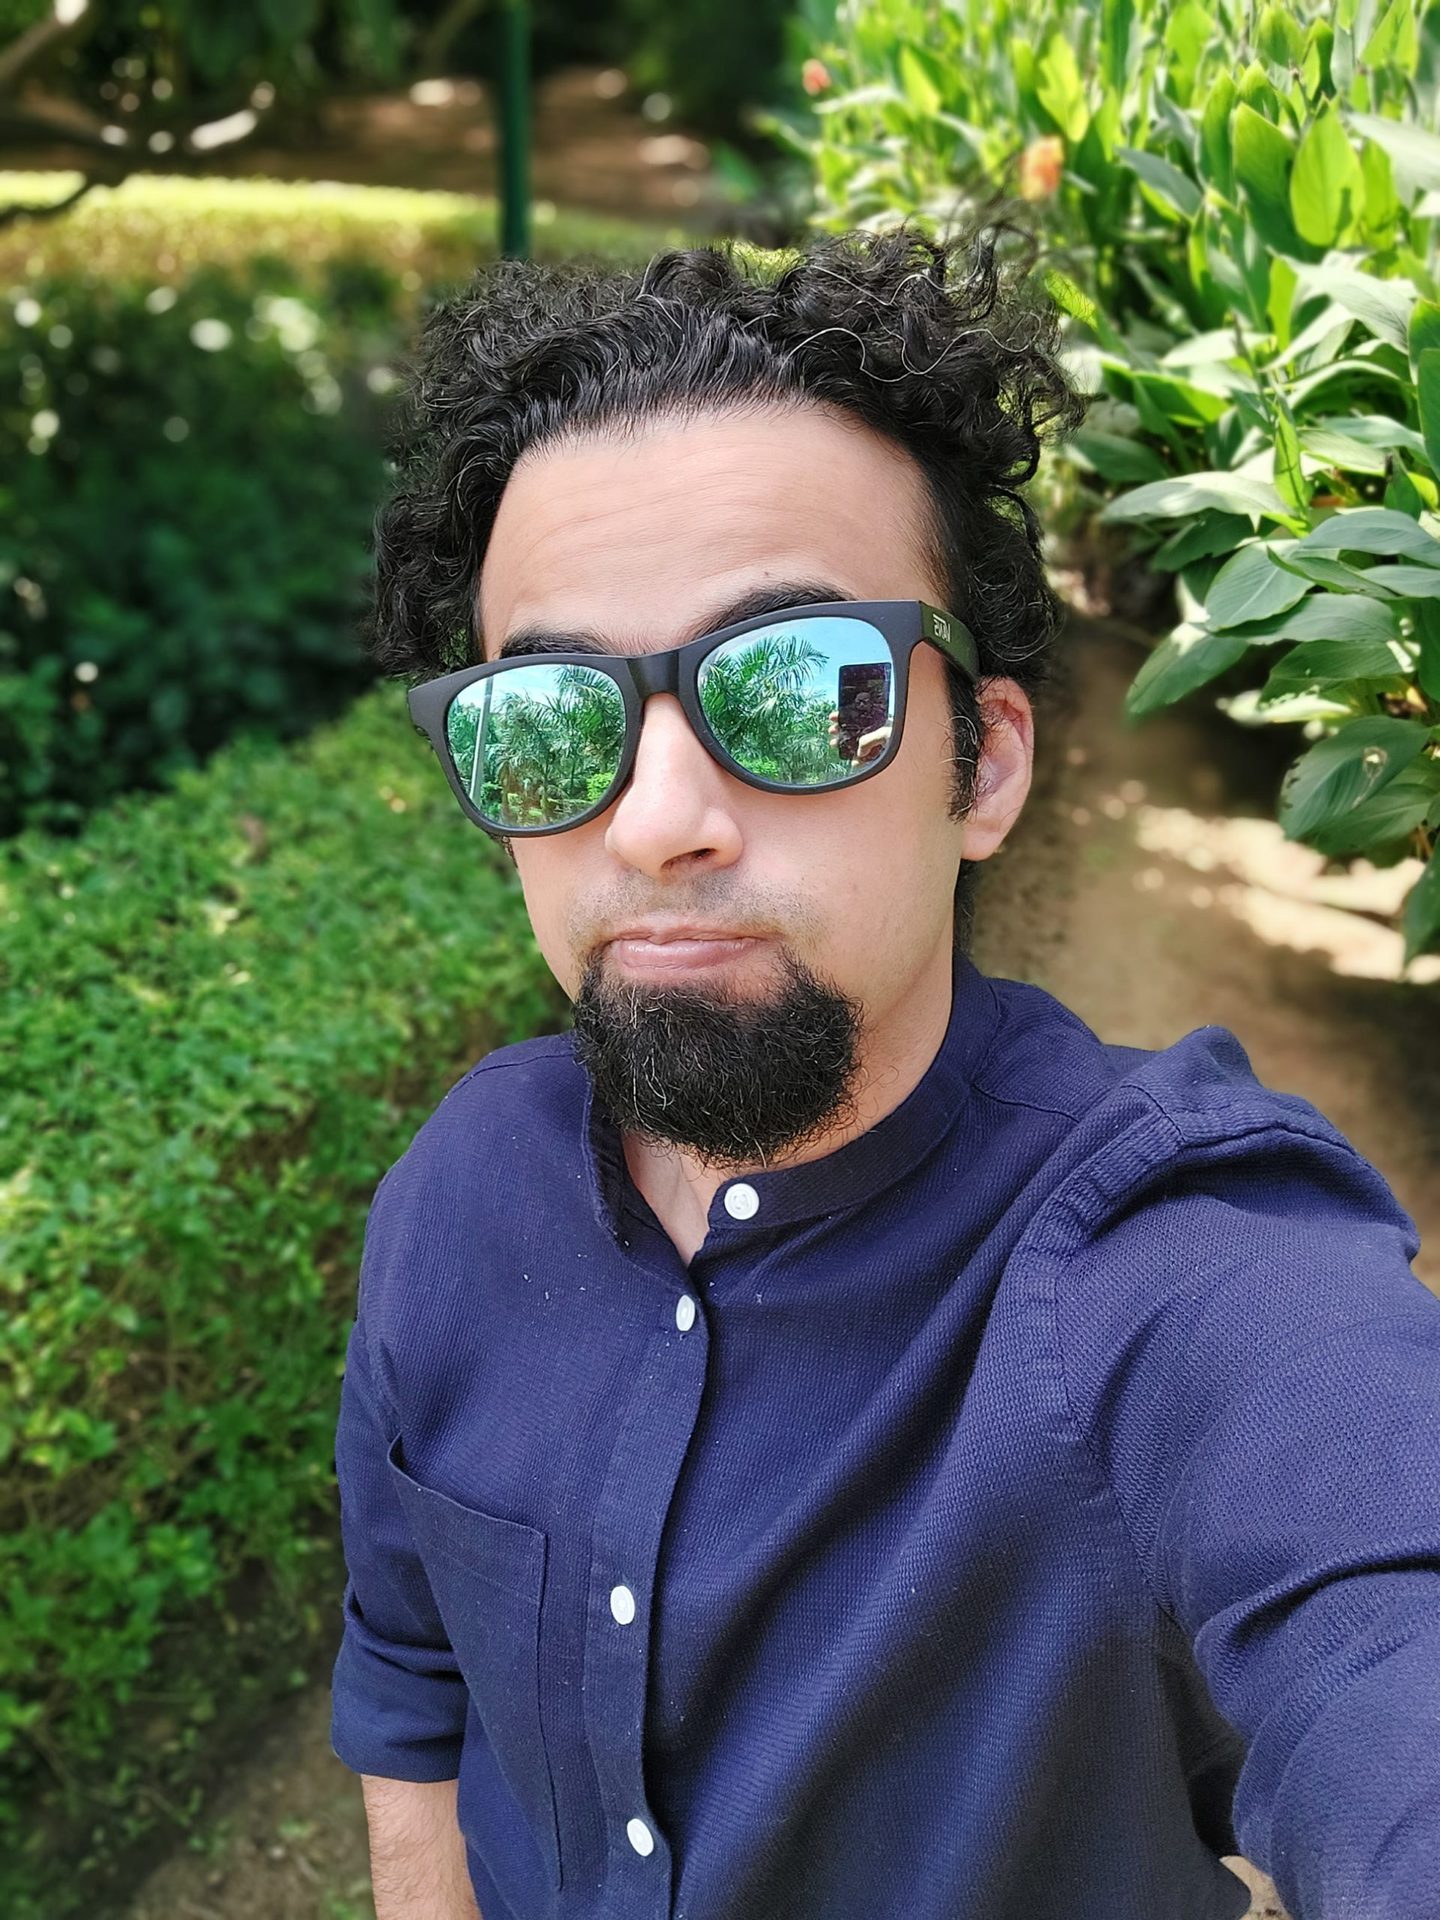 Samsung Galaxy A52s 5G selfie camera portrait mode shot of man with dark hair and beard wearing a blue long-sleeve shirt and mirrored shades, taken outdoors next to a green hedge.